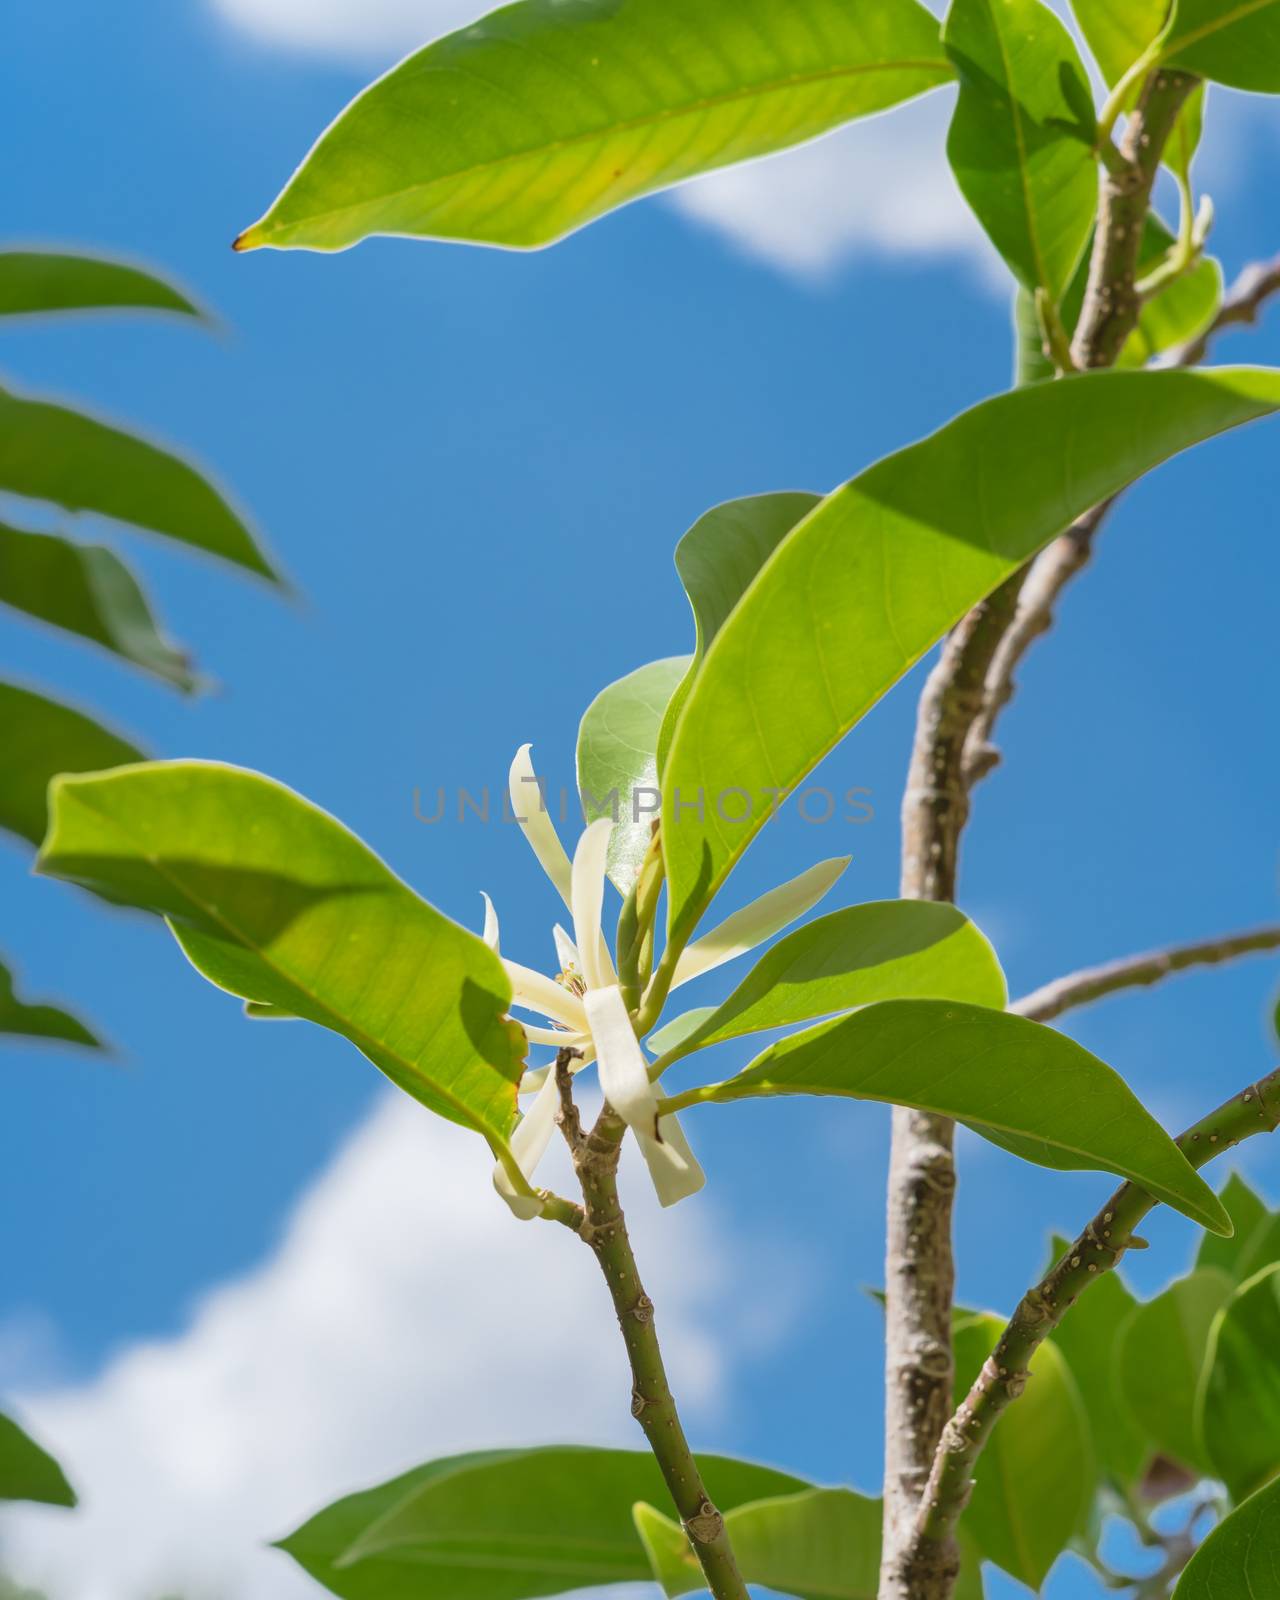 Look up view of blooming Cananga odorata Ylang-ylang flower under cloud blue sky. Blooming fragrant cananga, or perfume tree known as a tropical plant that native to India